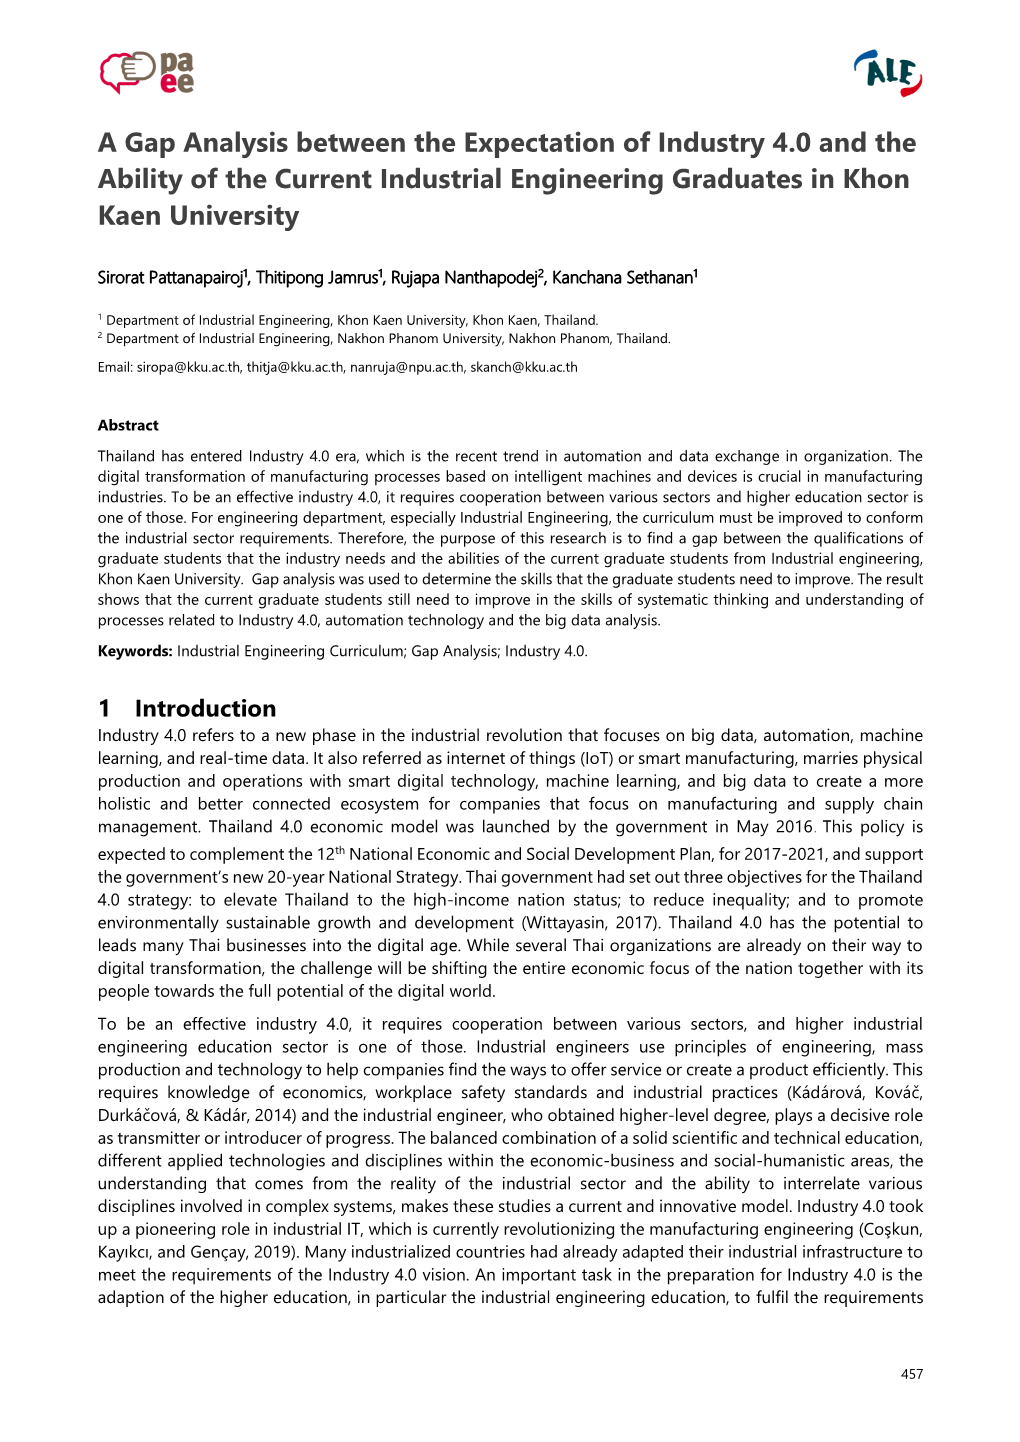 A Gap Analysis Between the Expectation of Industry 4.0 and the Ability of the Current Industrial Engineering Graduates in Khon Kaen University